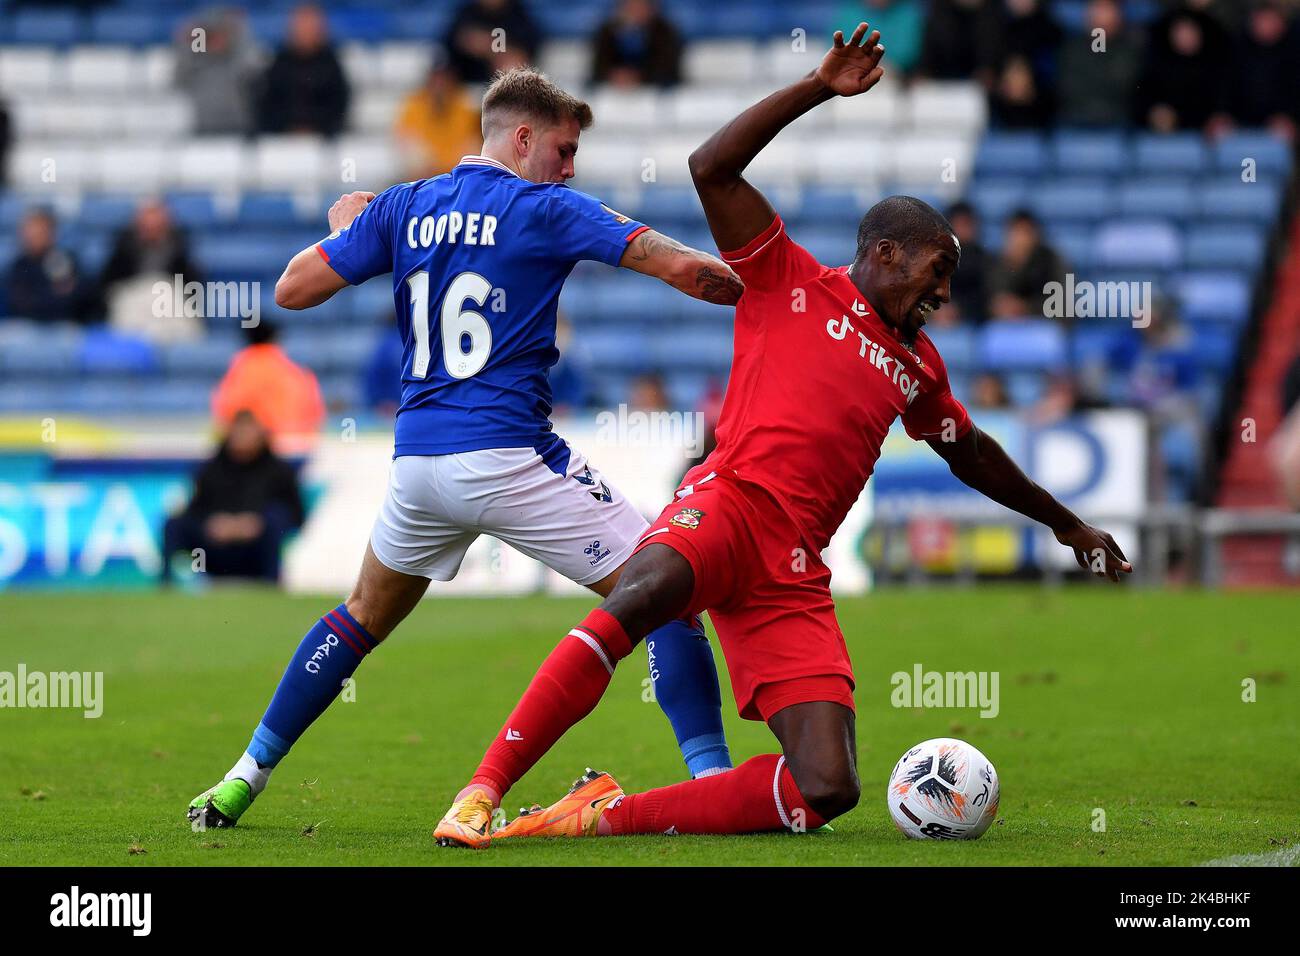 Oldham, UK. 1st October 2022during the Vanarama National League match between Oldham Athletic and Wrexham at Boundary Park, Oldham on Saturday 1st October 2022Charlie Cooper of Oldham Athletic tussles with Aaron Hayden of Wrexham Football Club during the Vanarama National League match between Oldham Athletic and Wrexham at Boundary Park, Oldham on Saturday 1st October 2022during the Vanarama National League match between Oldham Athletic and Wrexham at Boundary Park, Oldham on Saturday 1st October 2022. Credit: MI News & Sport /Alamy Live News Stock Photo